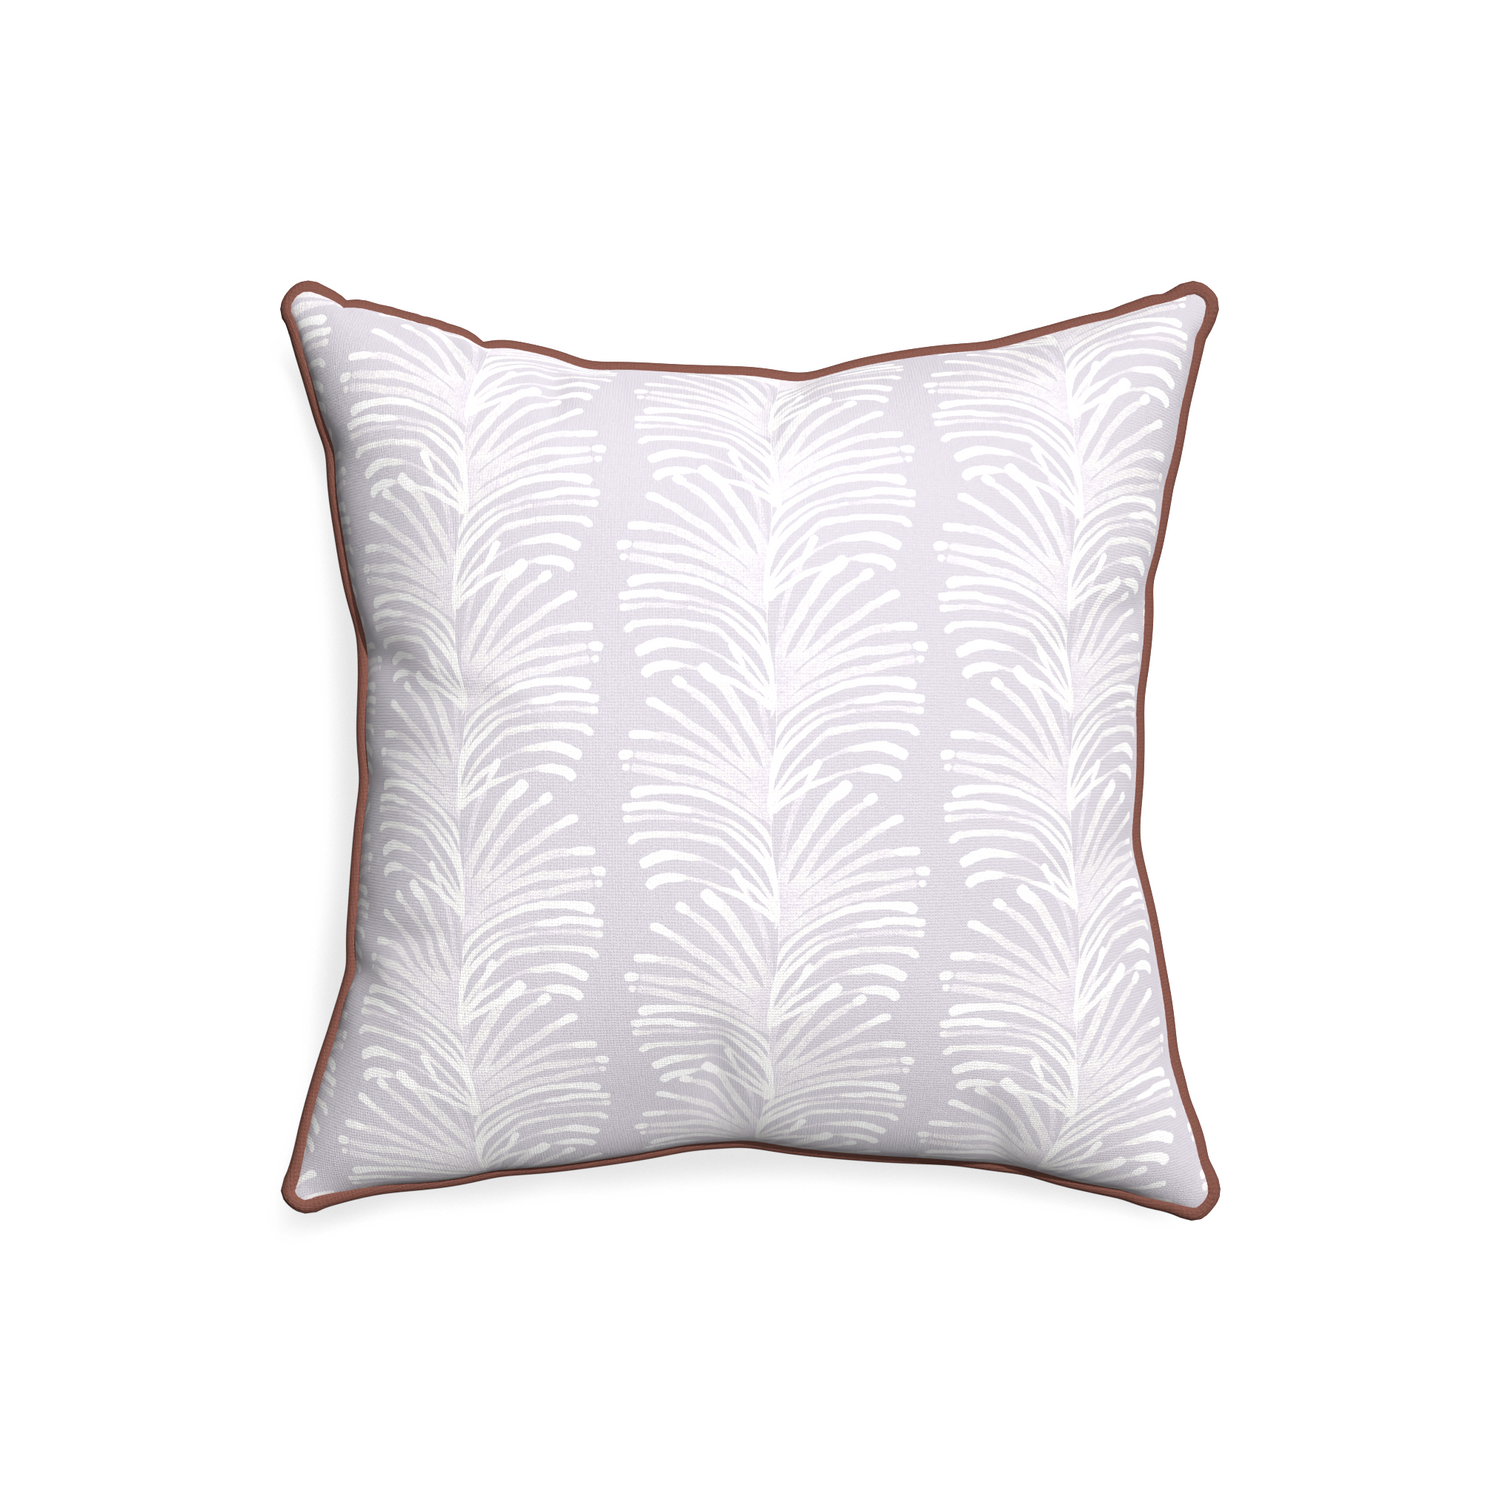 20-square emma lavender custom lavender botanical stripepillow with w piping on white background